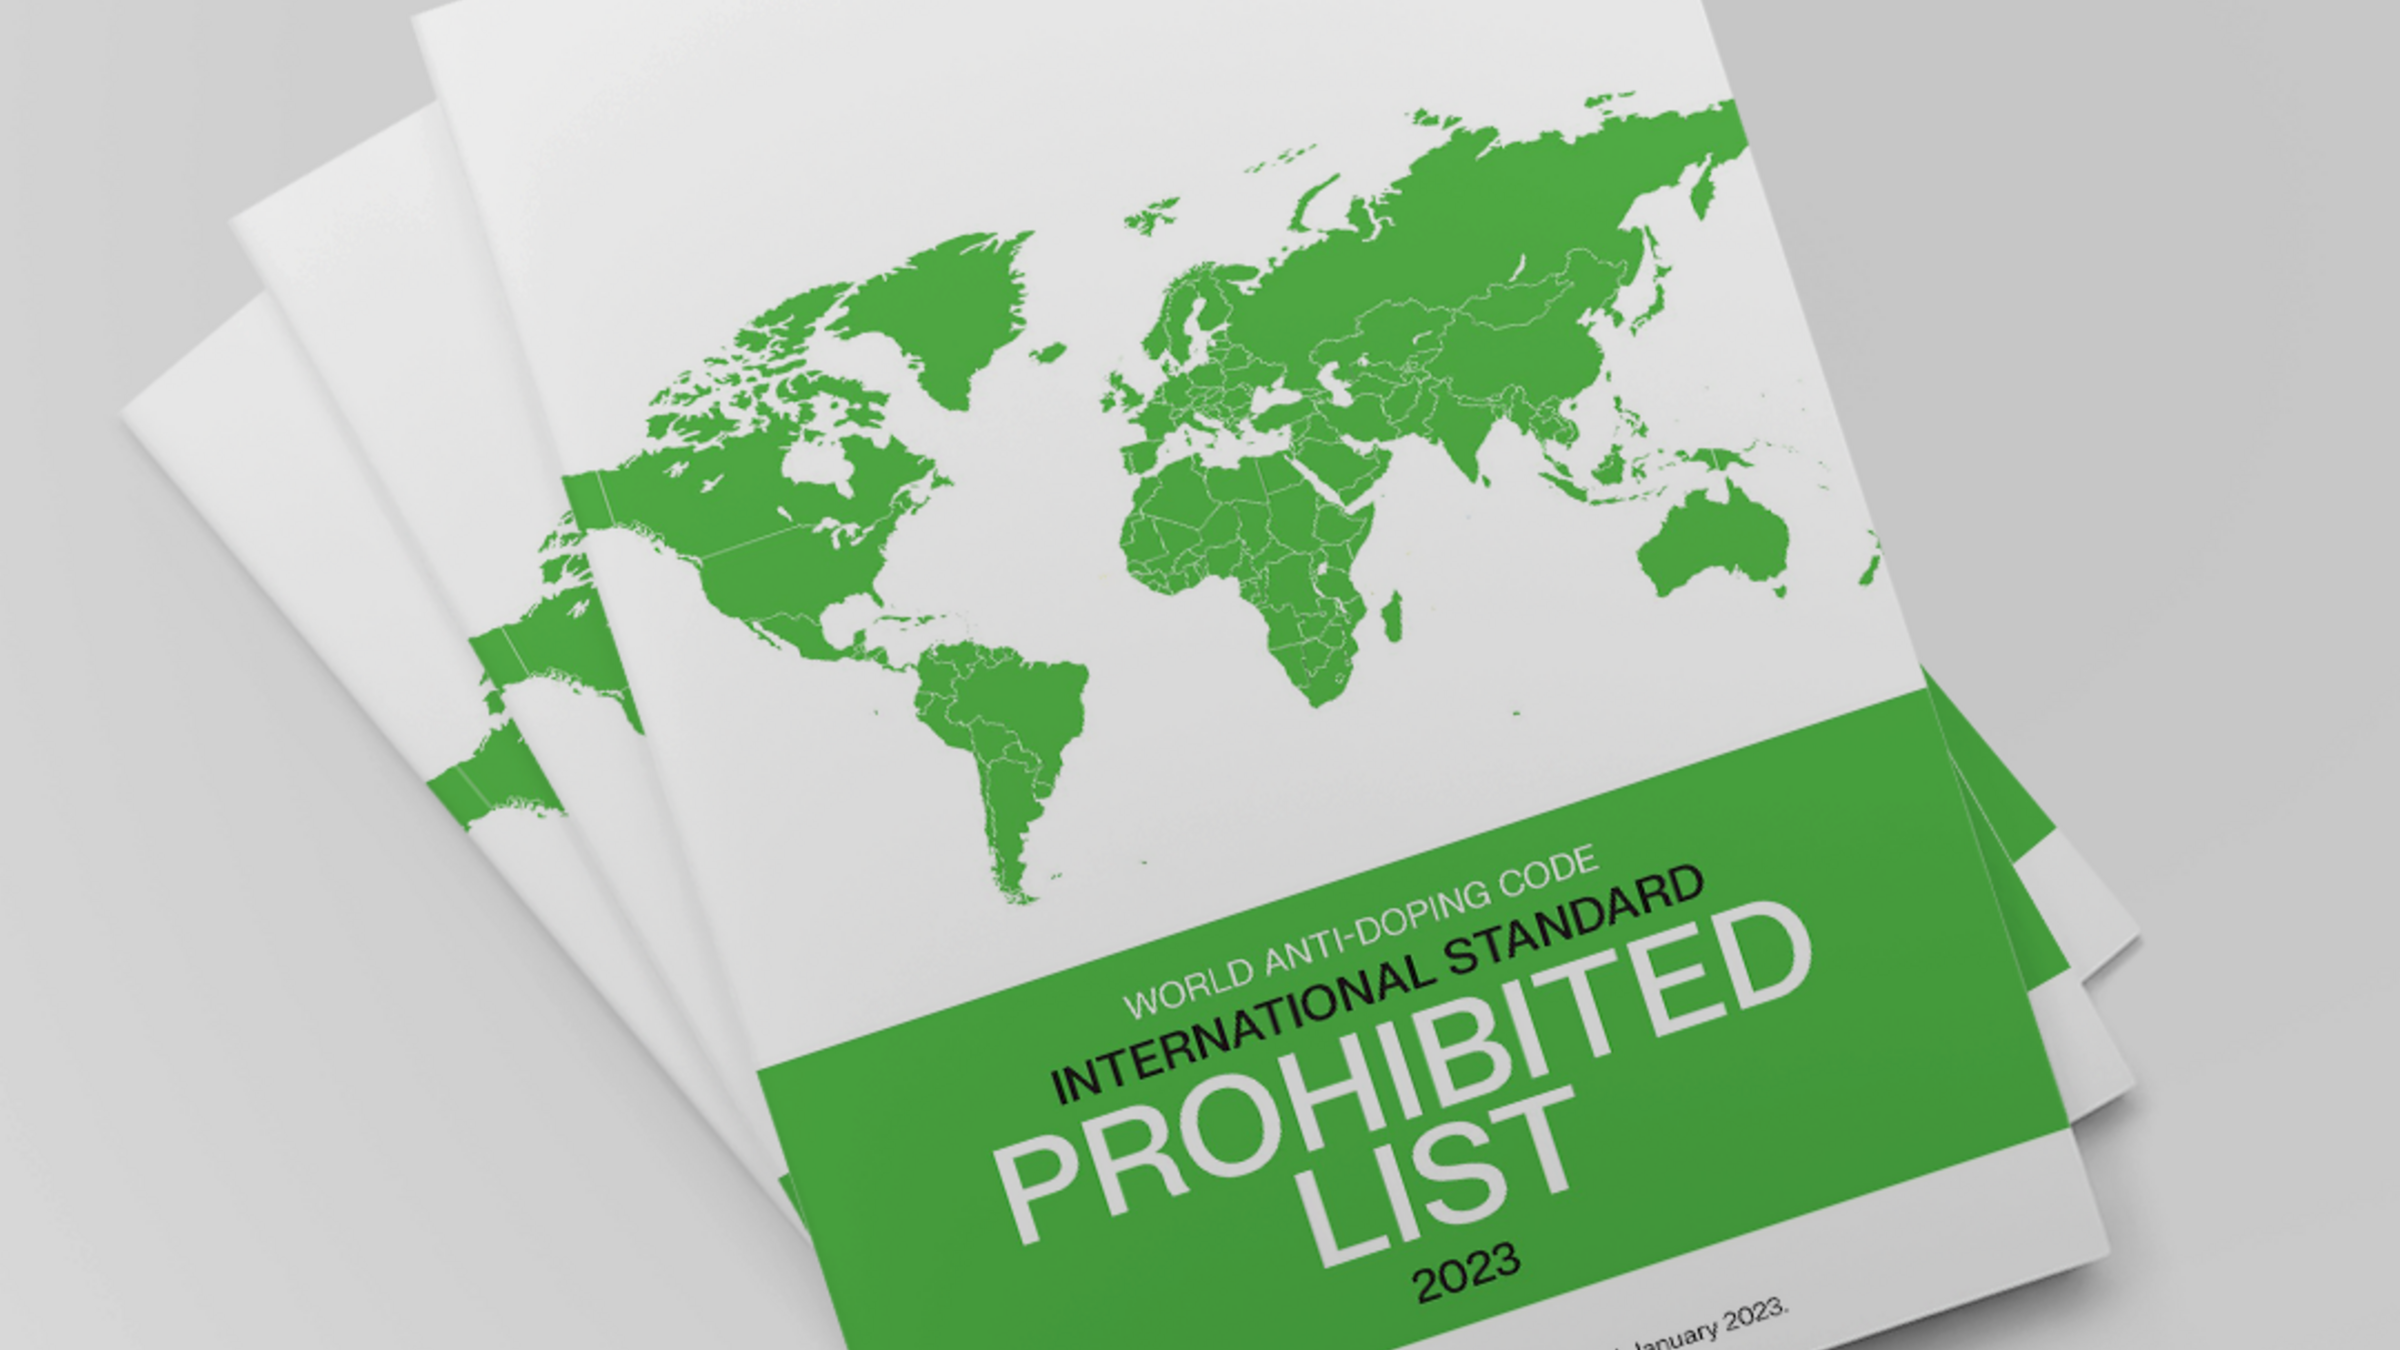 Reminder WADA’s 2023 Prohibited List comes into force on 1 January